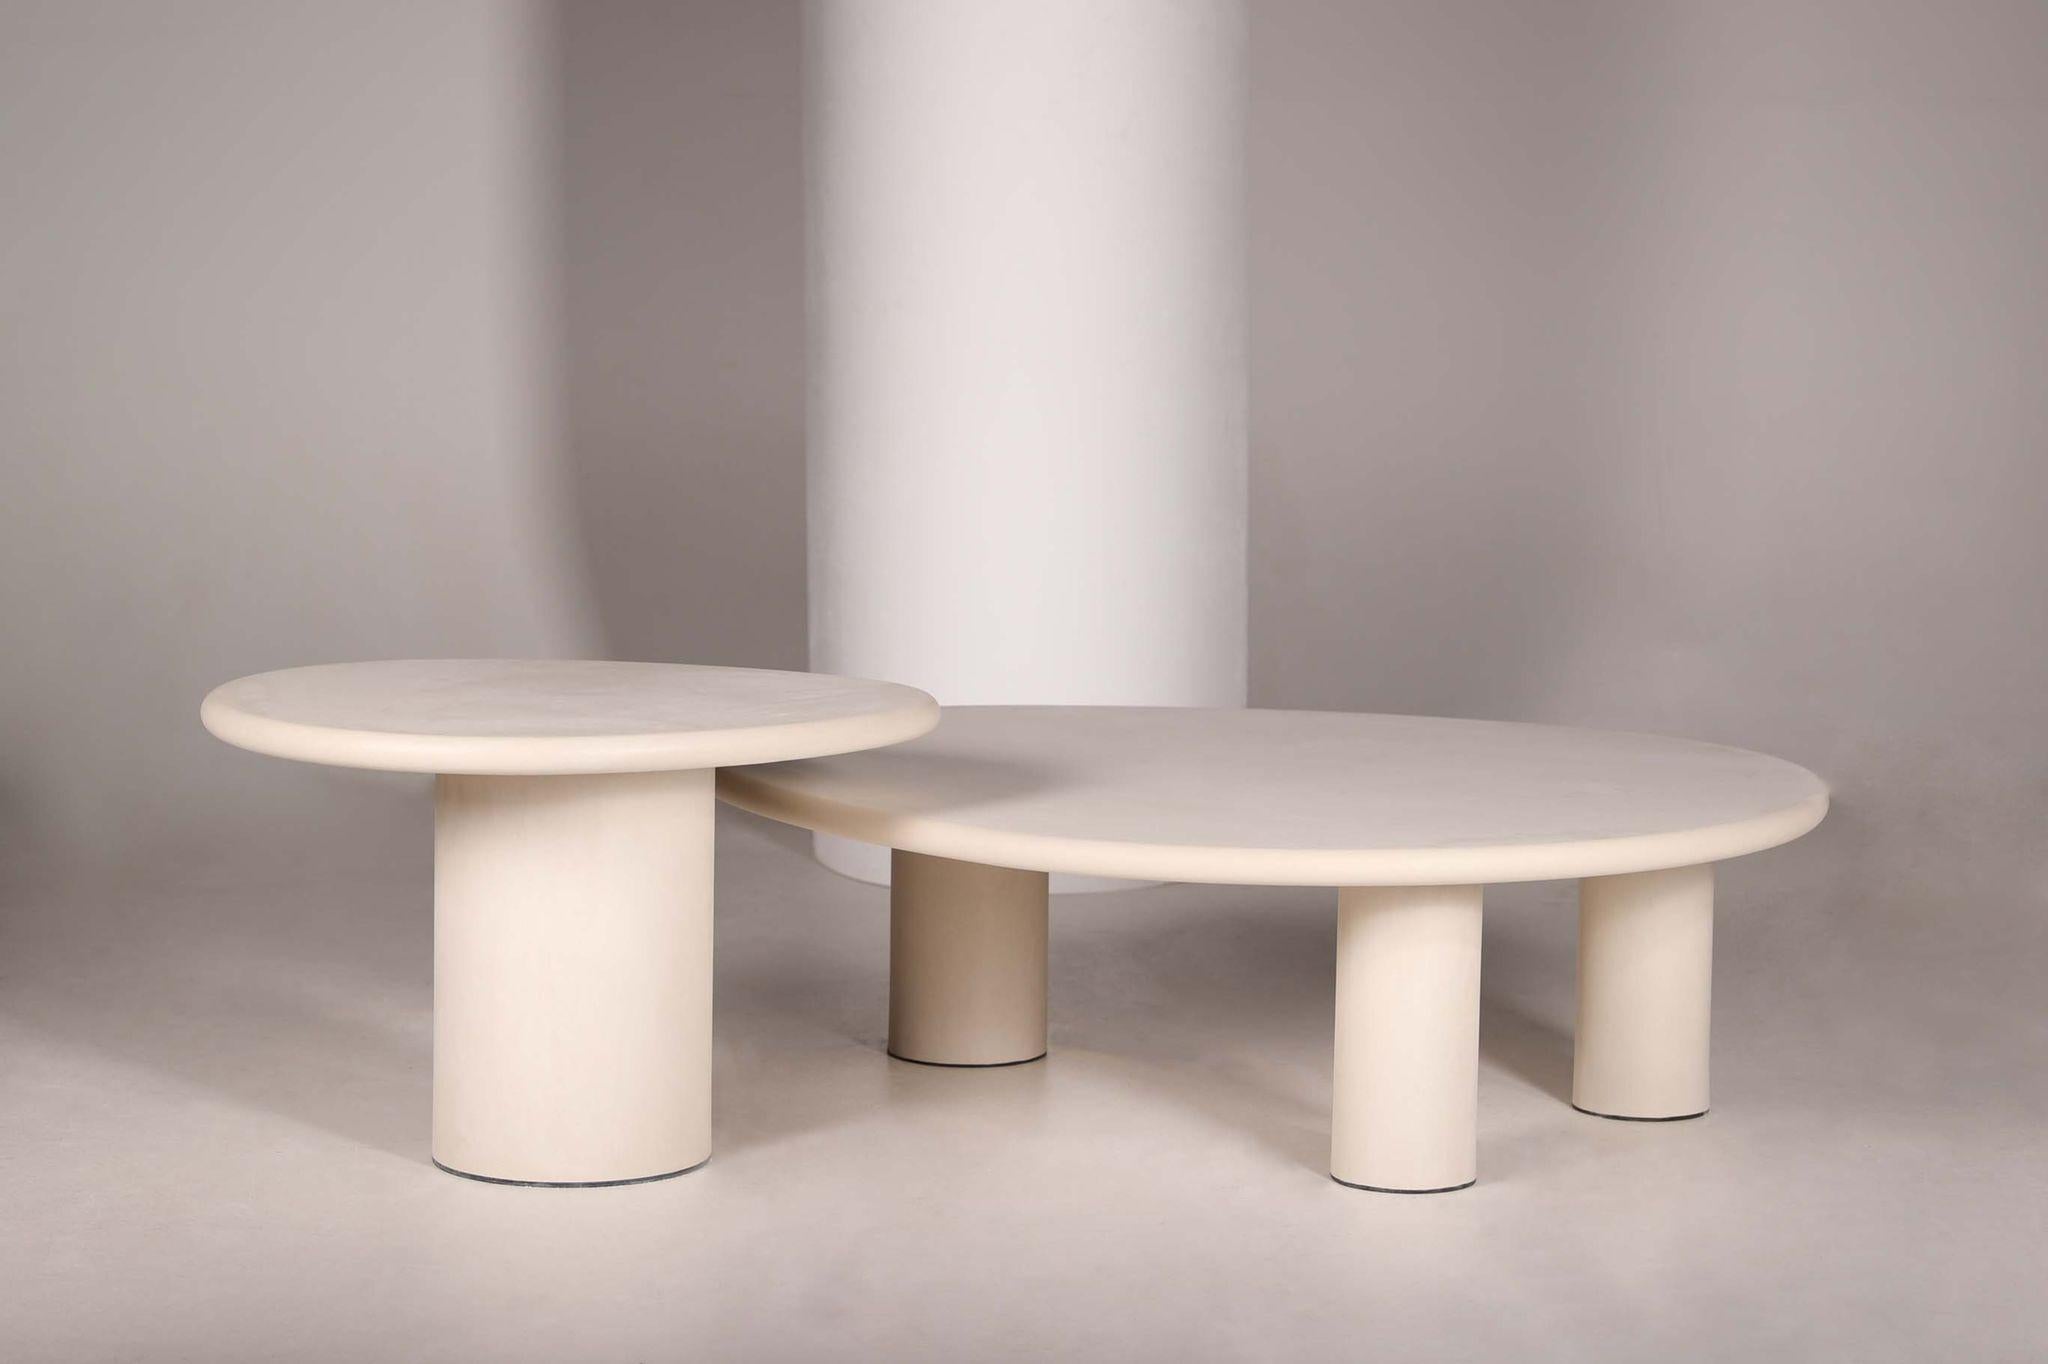 Handmade outdoor rock-shaped natural plaster table set by Philippe Colette.
Dimensions: 
80 x 60 x 50, foot Ø 30 cm
130 x 100 x 38, foot Ø 20 cm 
Materials: mineral lime plaster.

Our tables are in mineral lime plaster, unlike mortex, they are